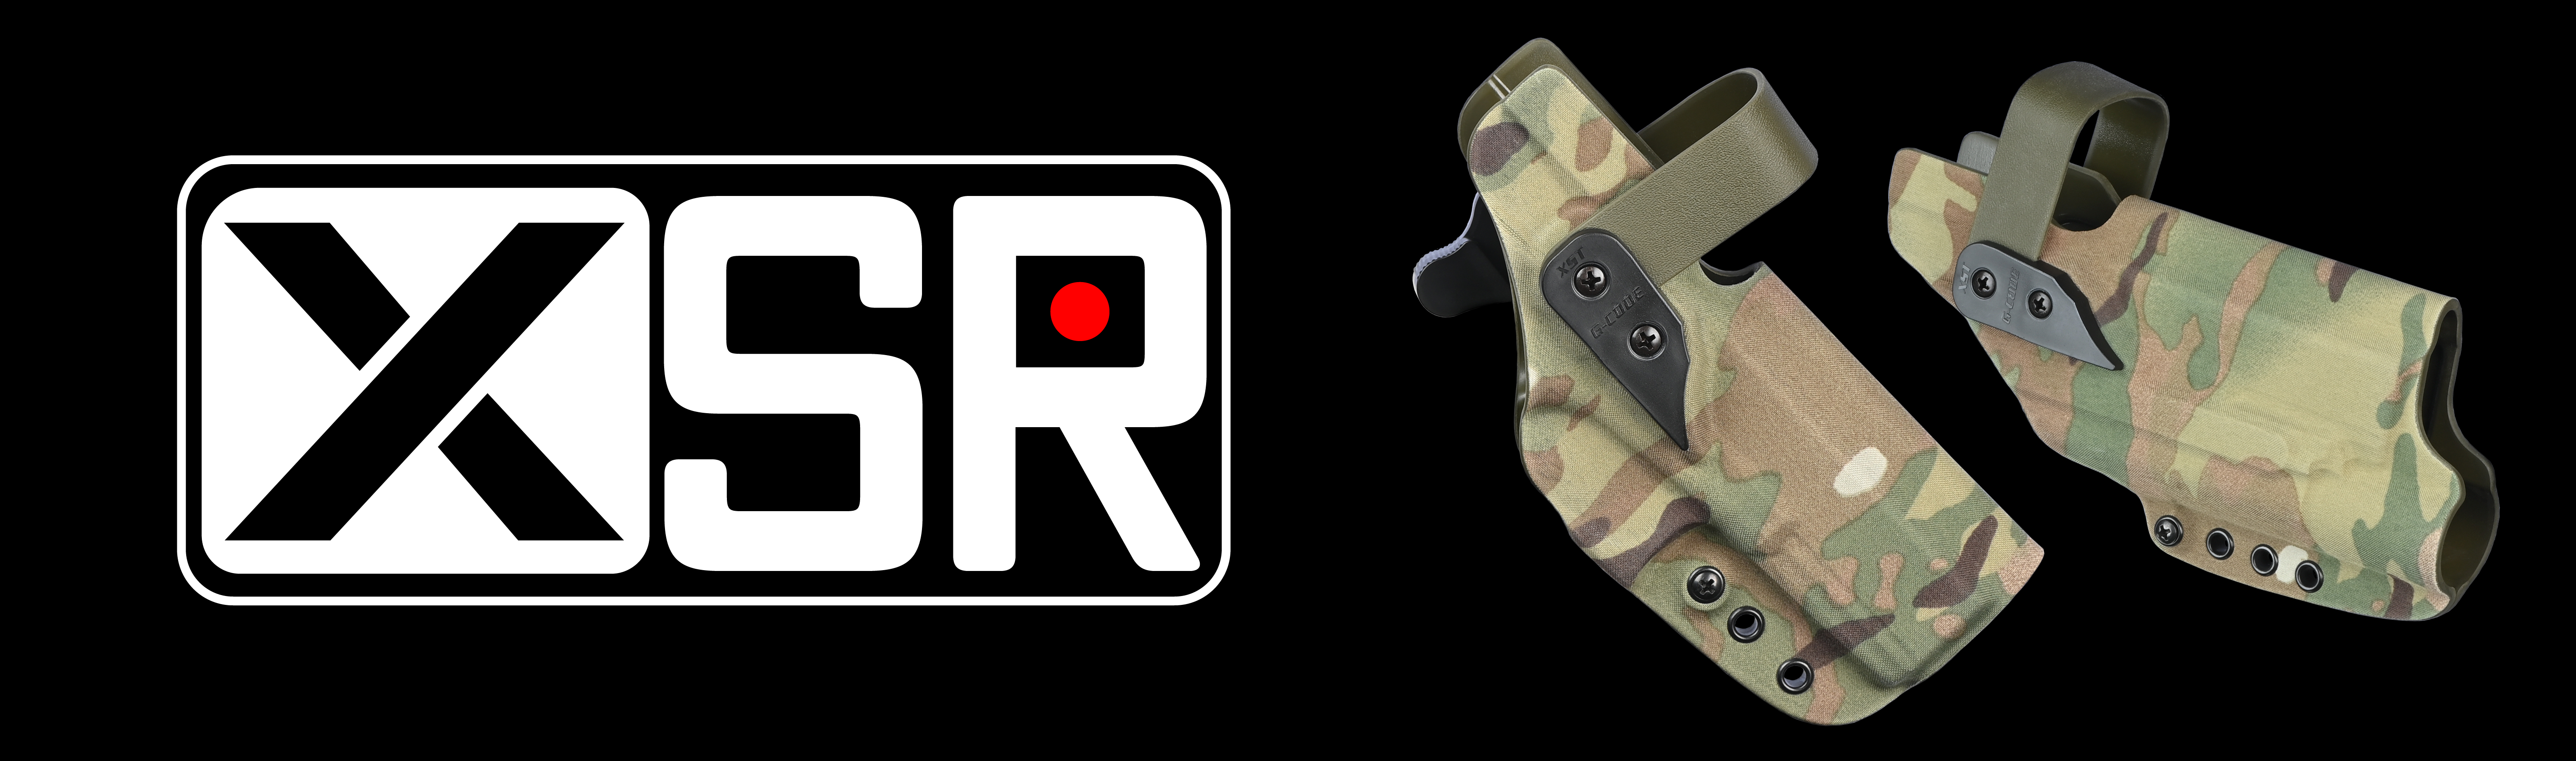 XSR Series Holsters - tactical holsters and equipment